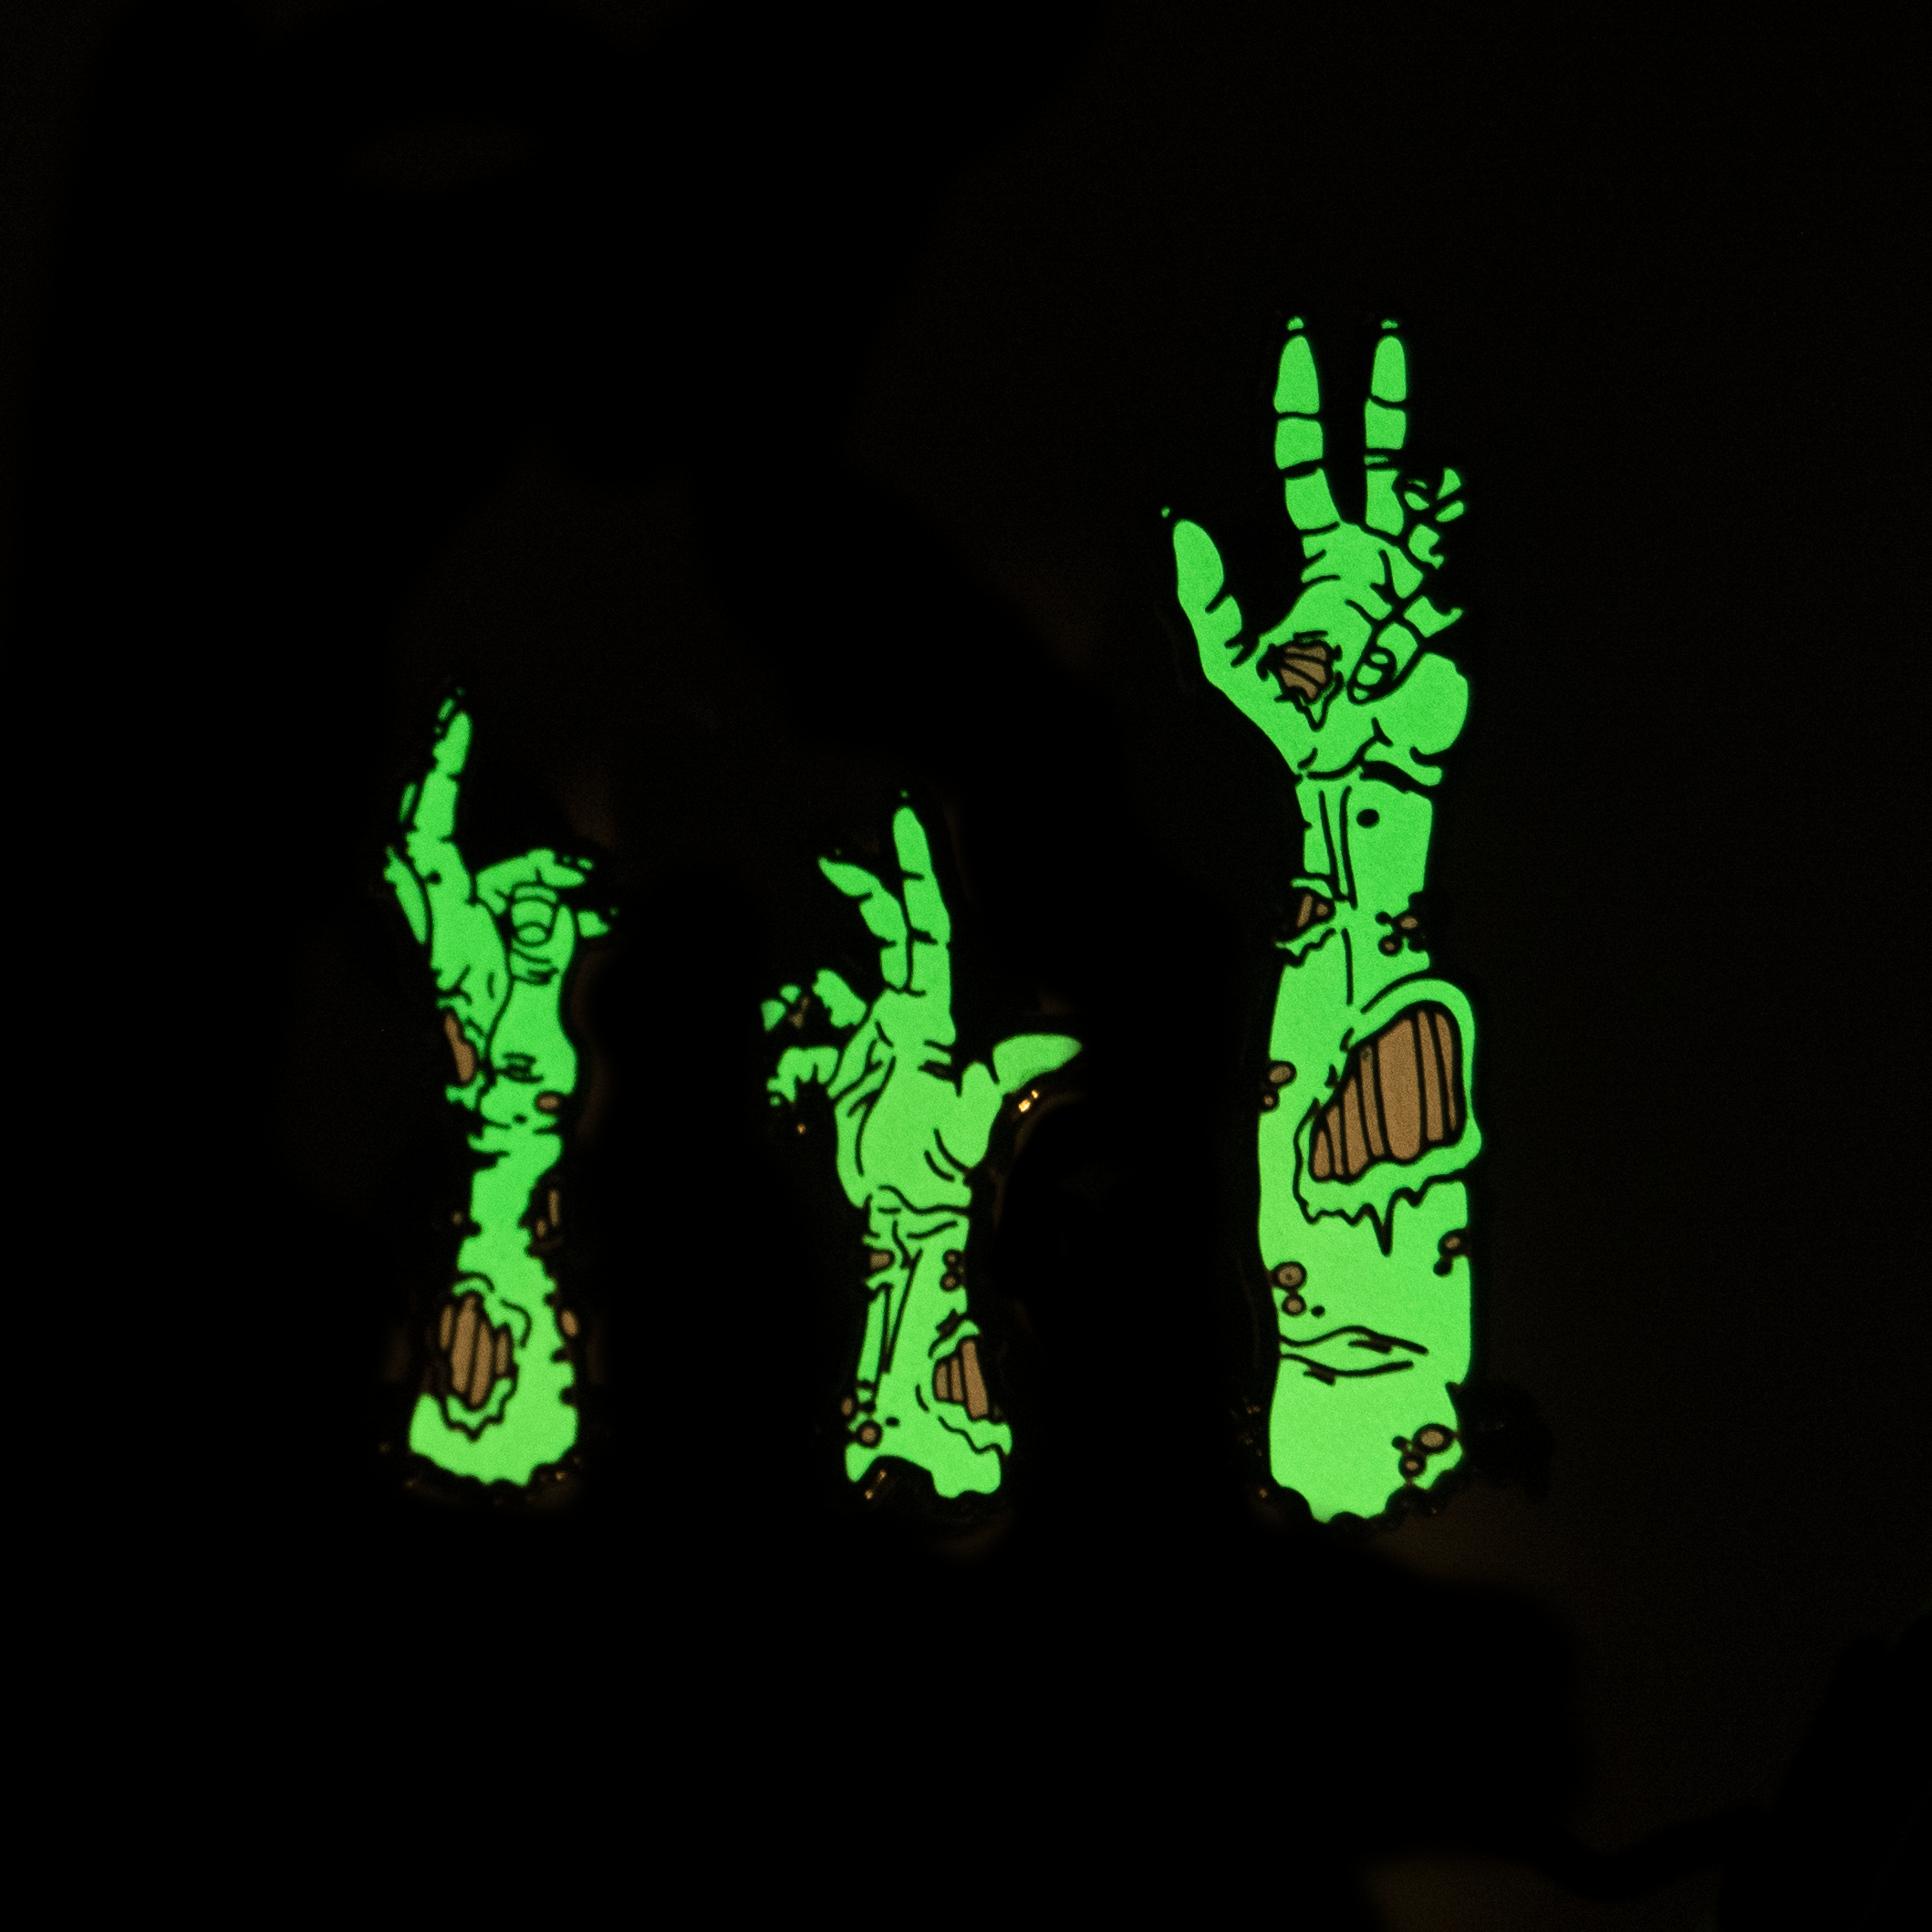 A set of three zombie arm pins, glowing in the dark.